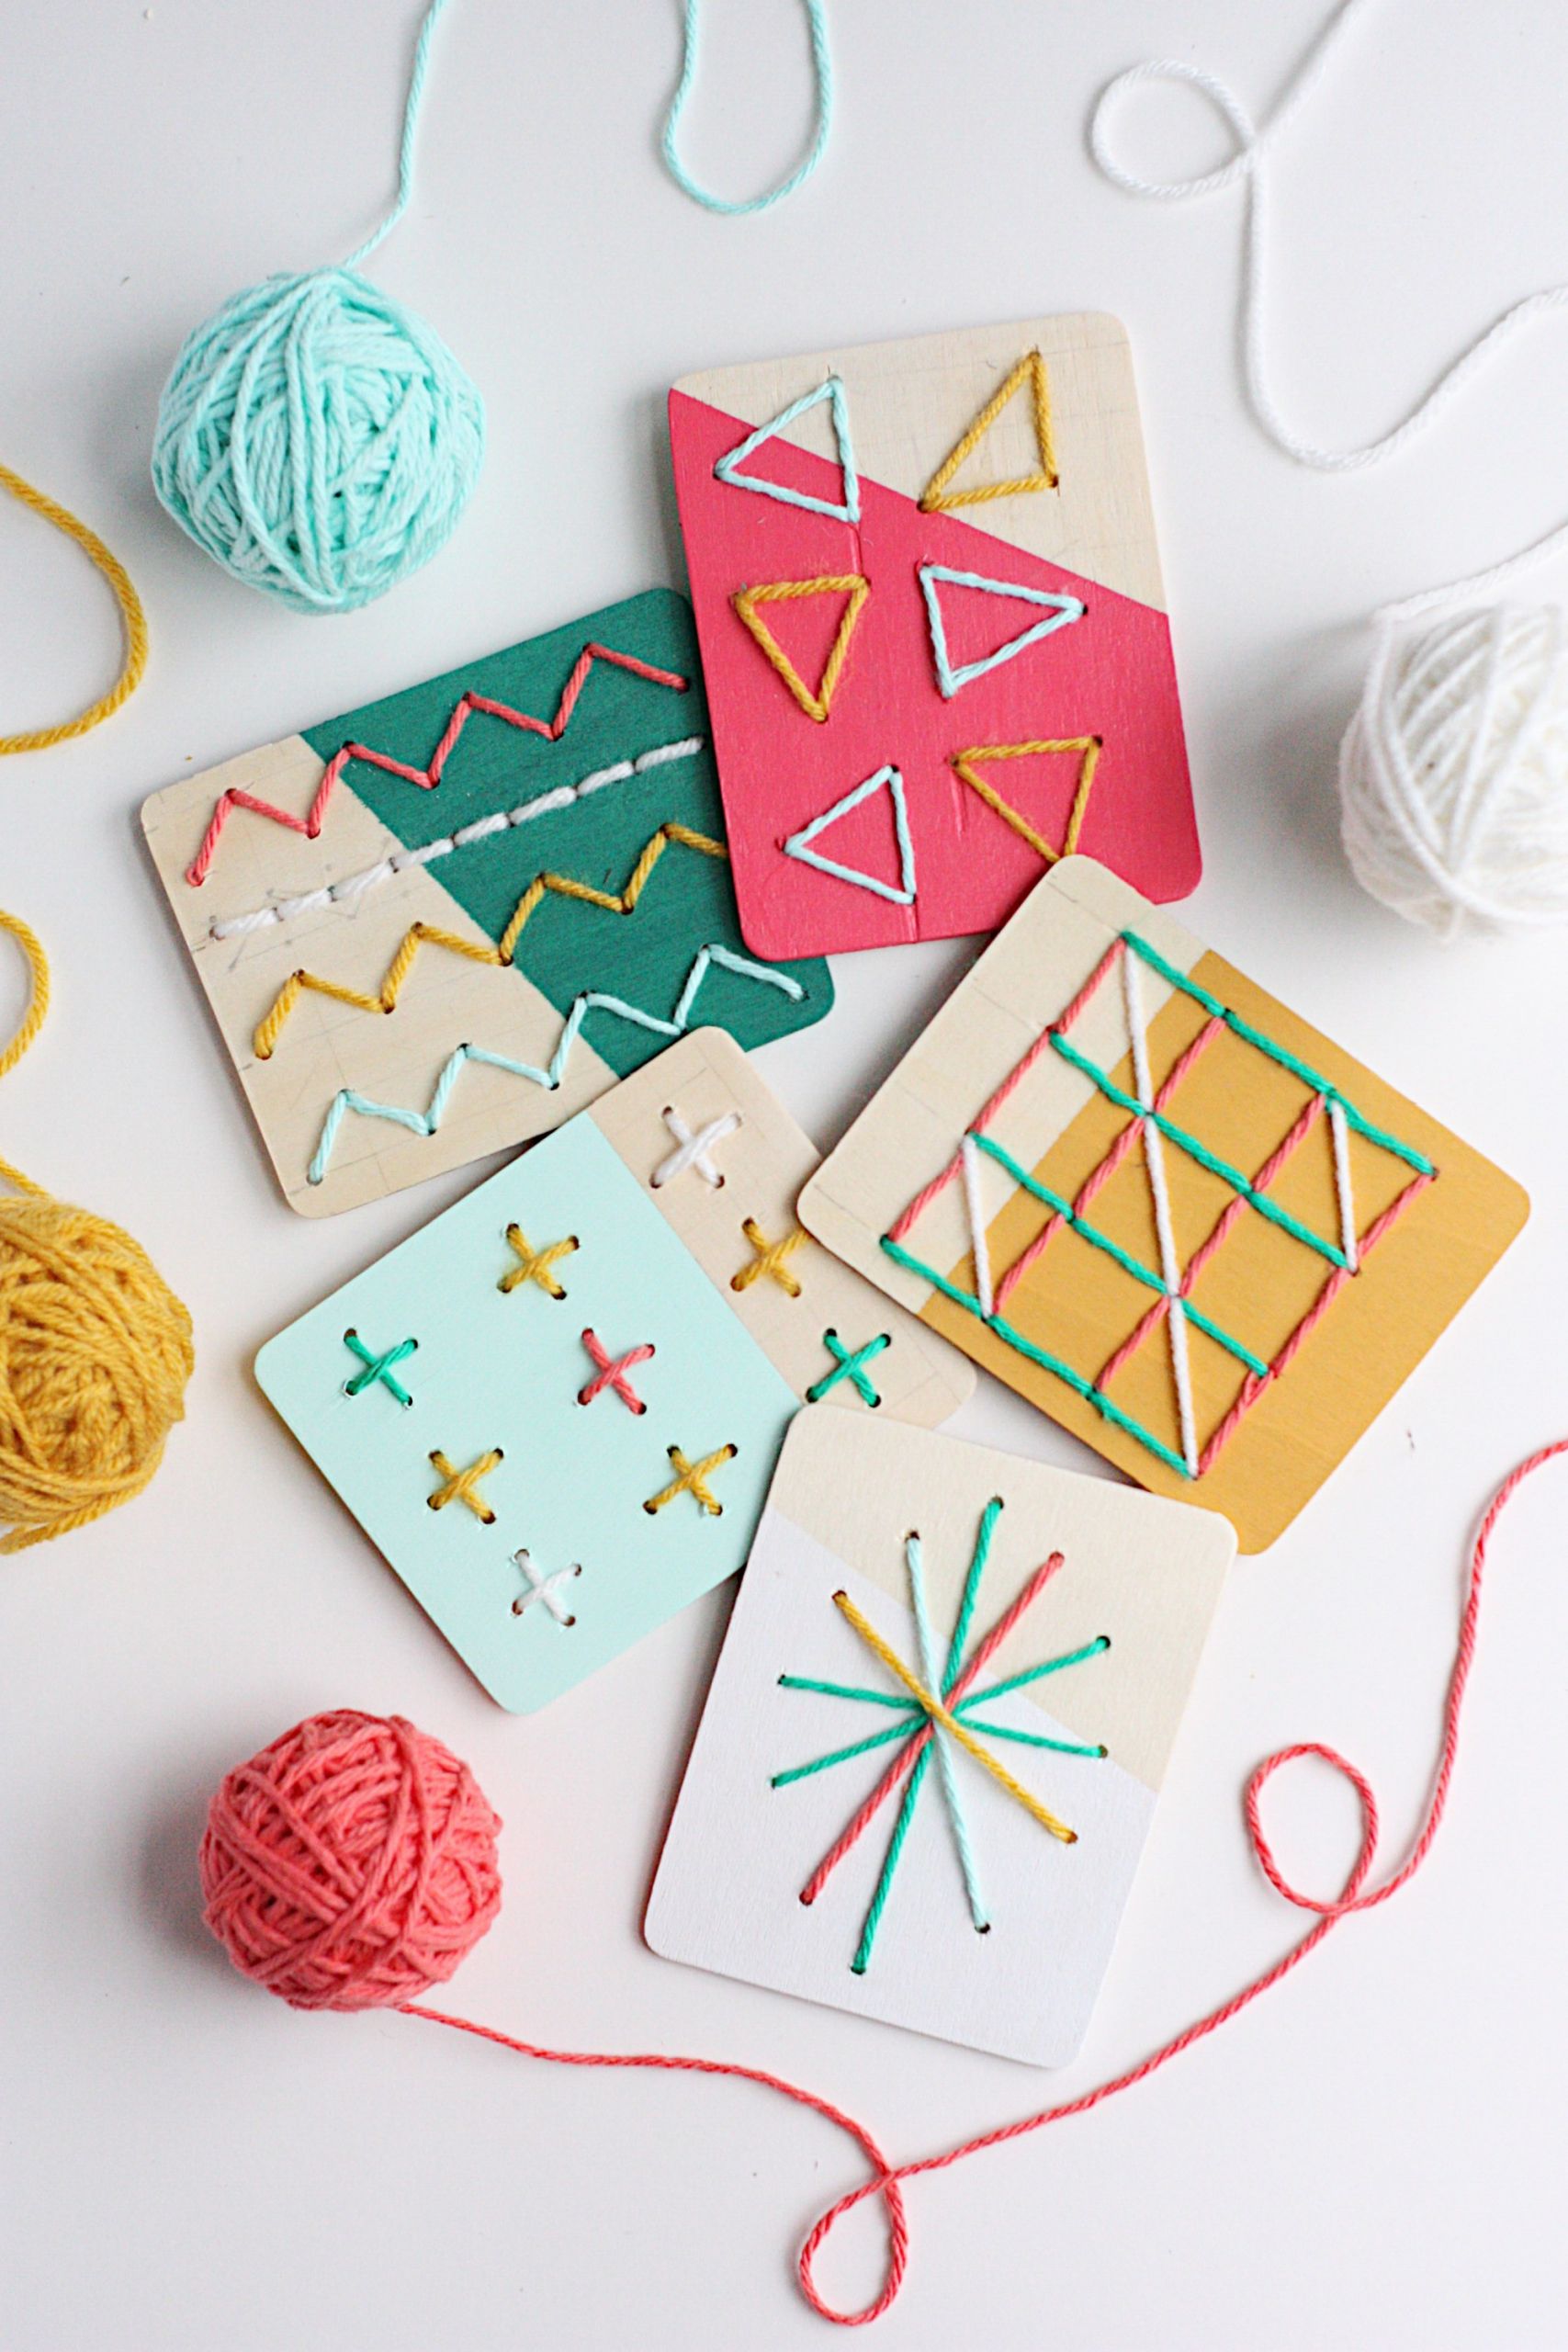 Kids DIY Projects
 11 DIY Yarn Crafts That Will Amaze Your Kids Shelterness